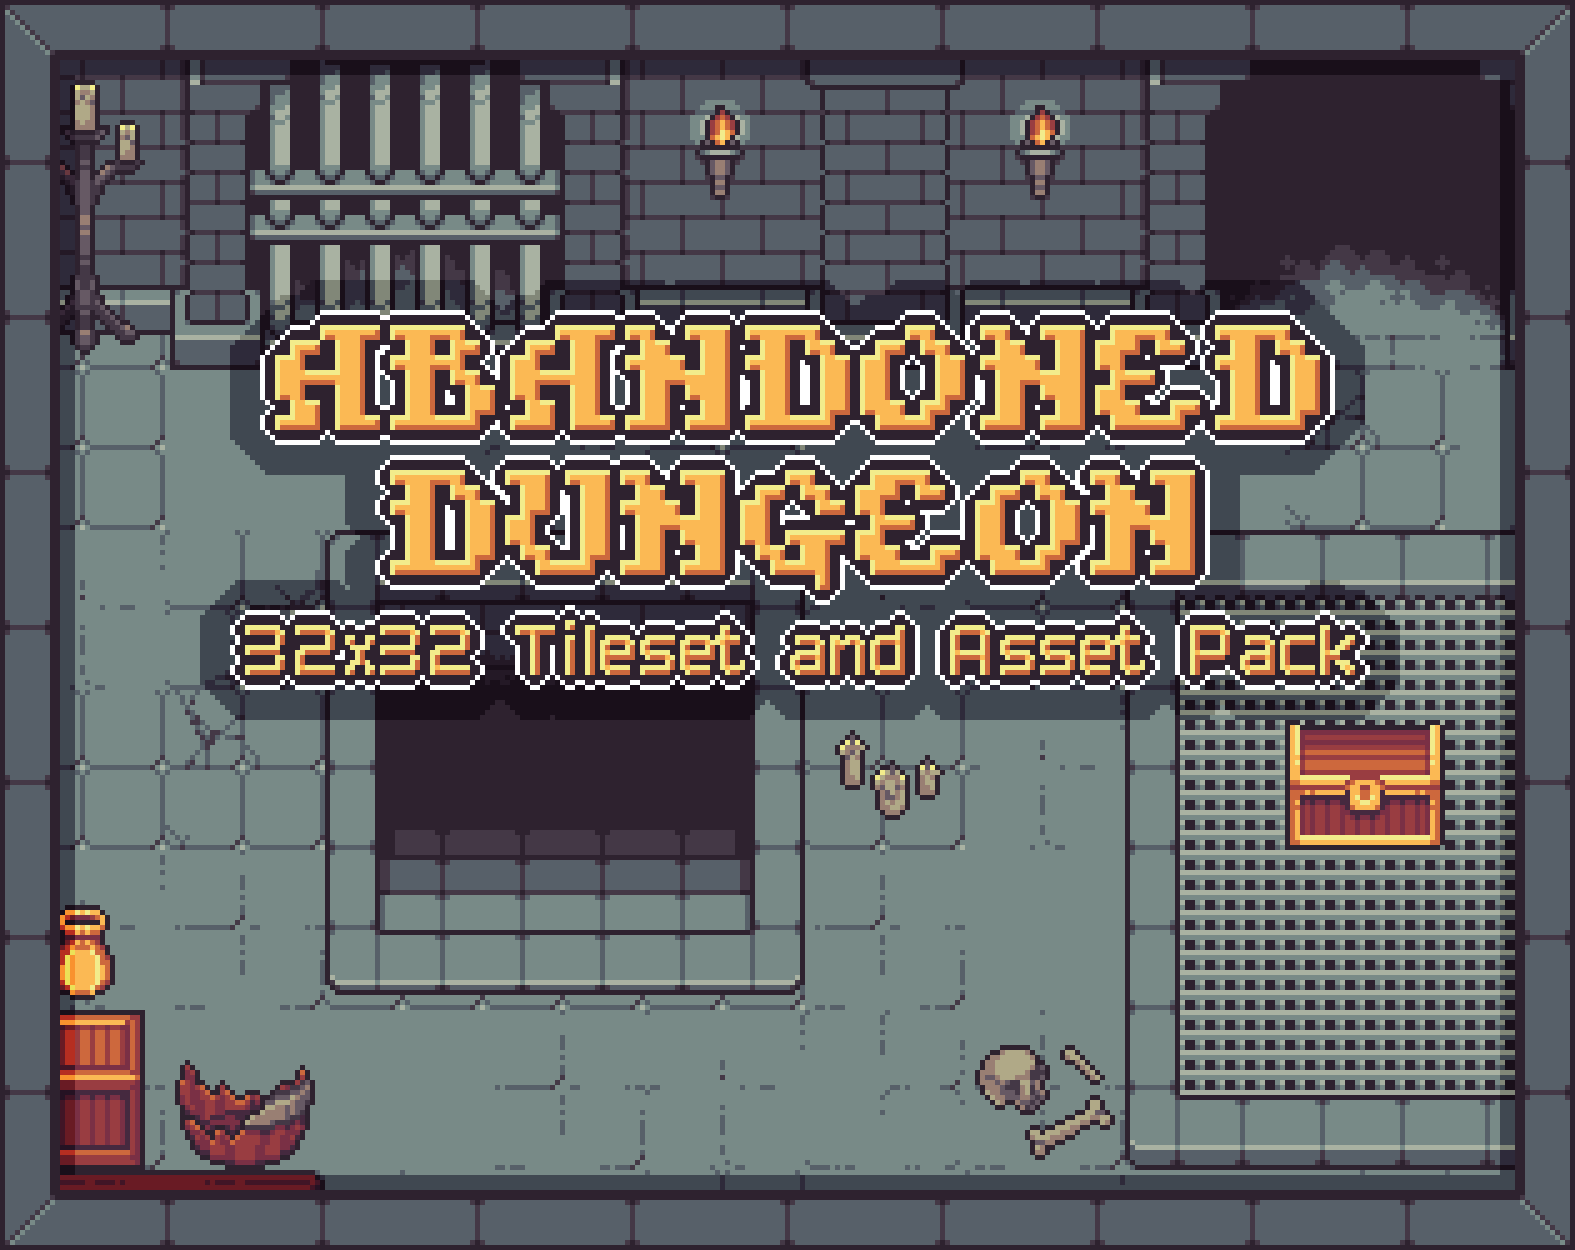 Abandoned Dungeon - Asset Pack and Tileset [32x32]